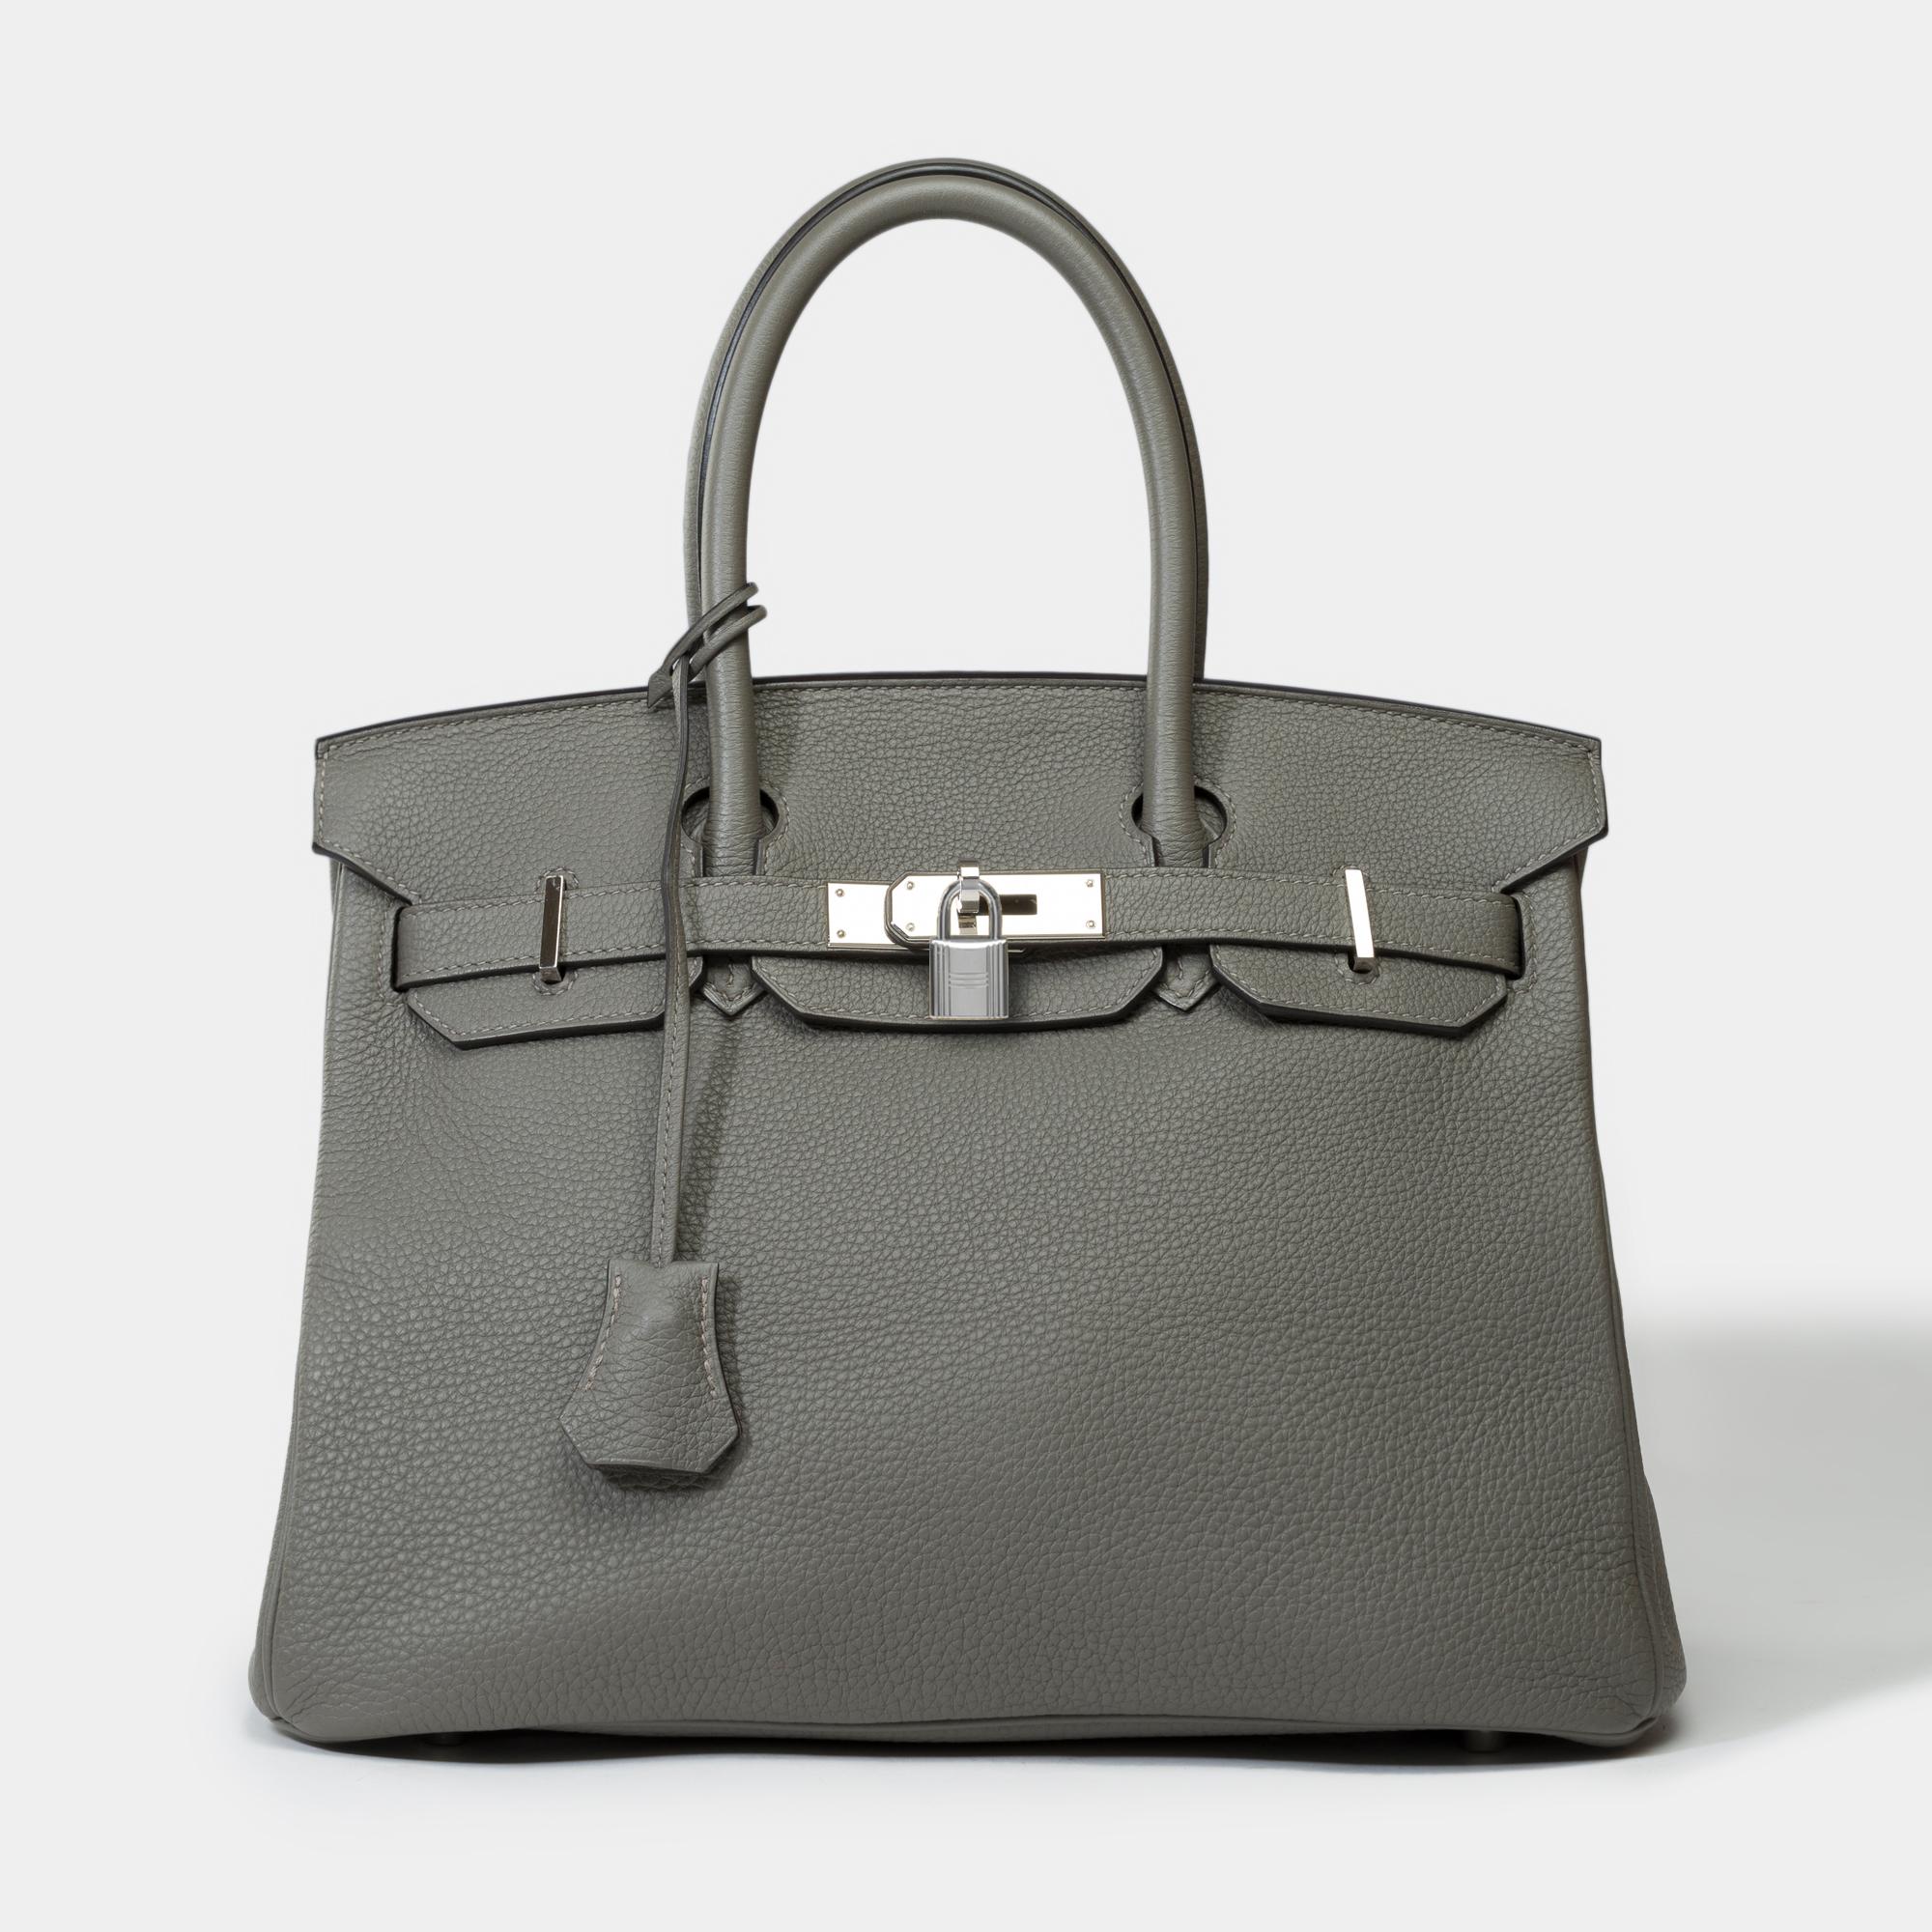 Very​ ​Chic​ ​Hermes​ ​Birkin​ ​30​ ​handbag​ ​in​ ​Gris​ ​Meyer​ ​Togo​ ​leather​ ​,​ ​palladium​ ​silver​ ​metal​ ​trim​ ​,​ ​double​ ​handle​ ​in​ ​grey​ ​leather​ ​for​ ​a​ ​hand​ ​carry

Flap​ ​closure
Grey​ ​leather​ ​inner​ ​lining​ ​,​ ​a​